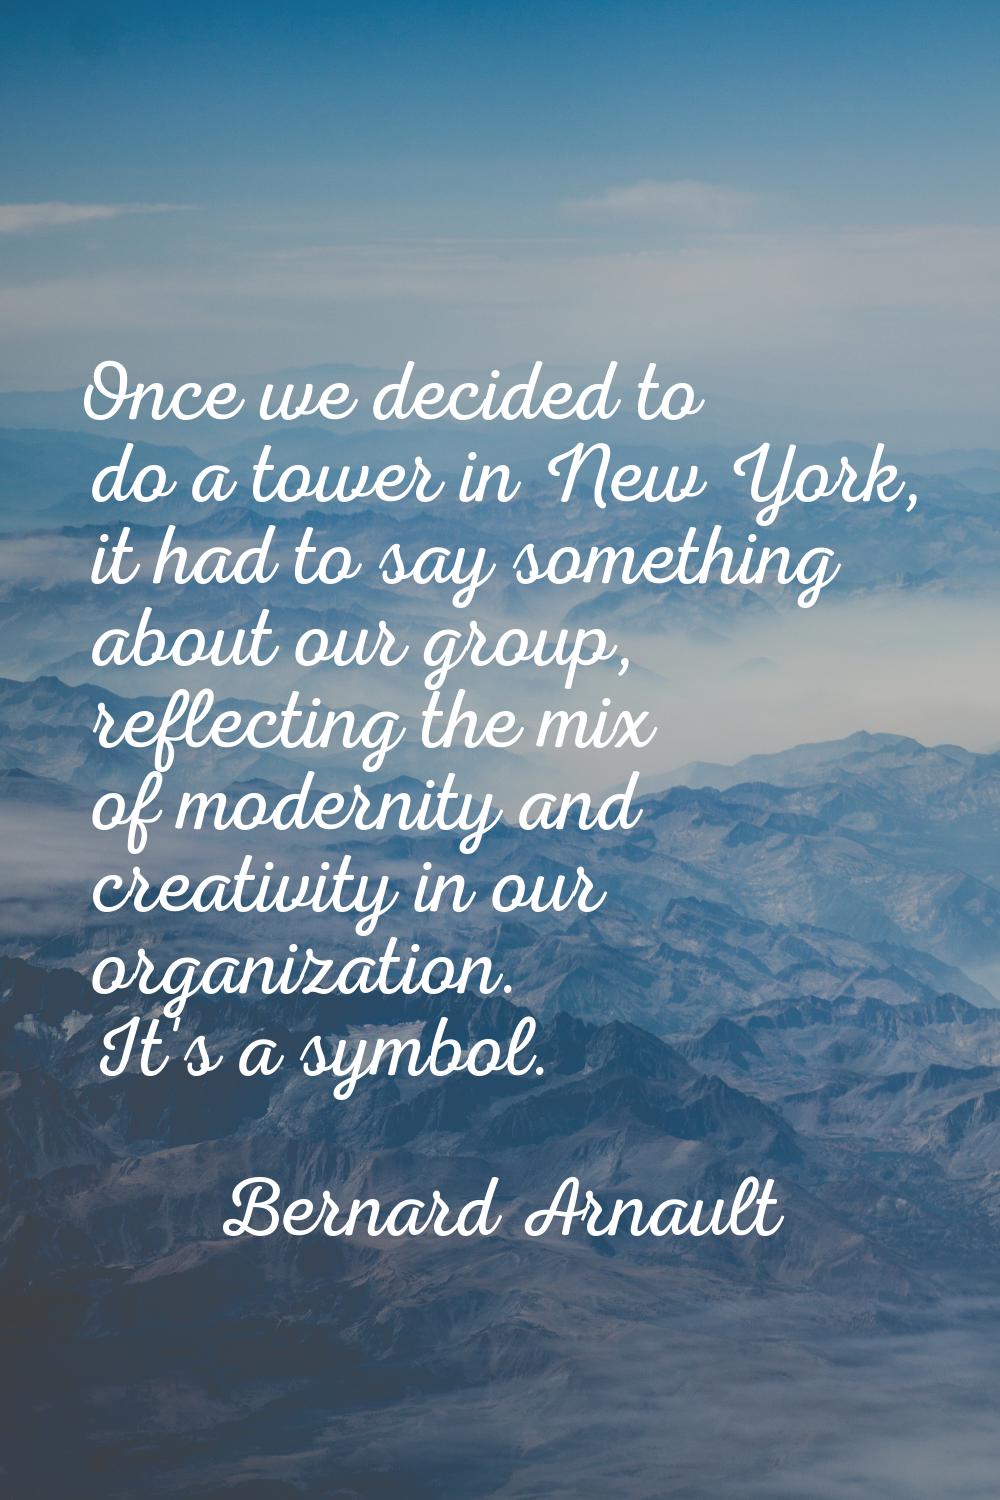 Once we decided to do a tower in New York, it had to say something about our group, reflecting the 